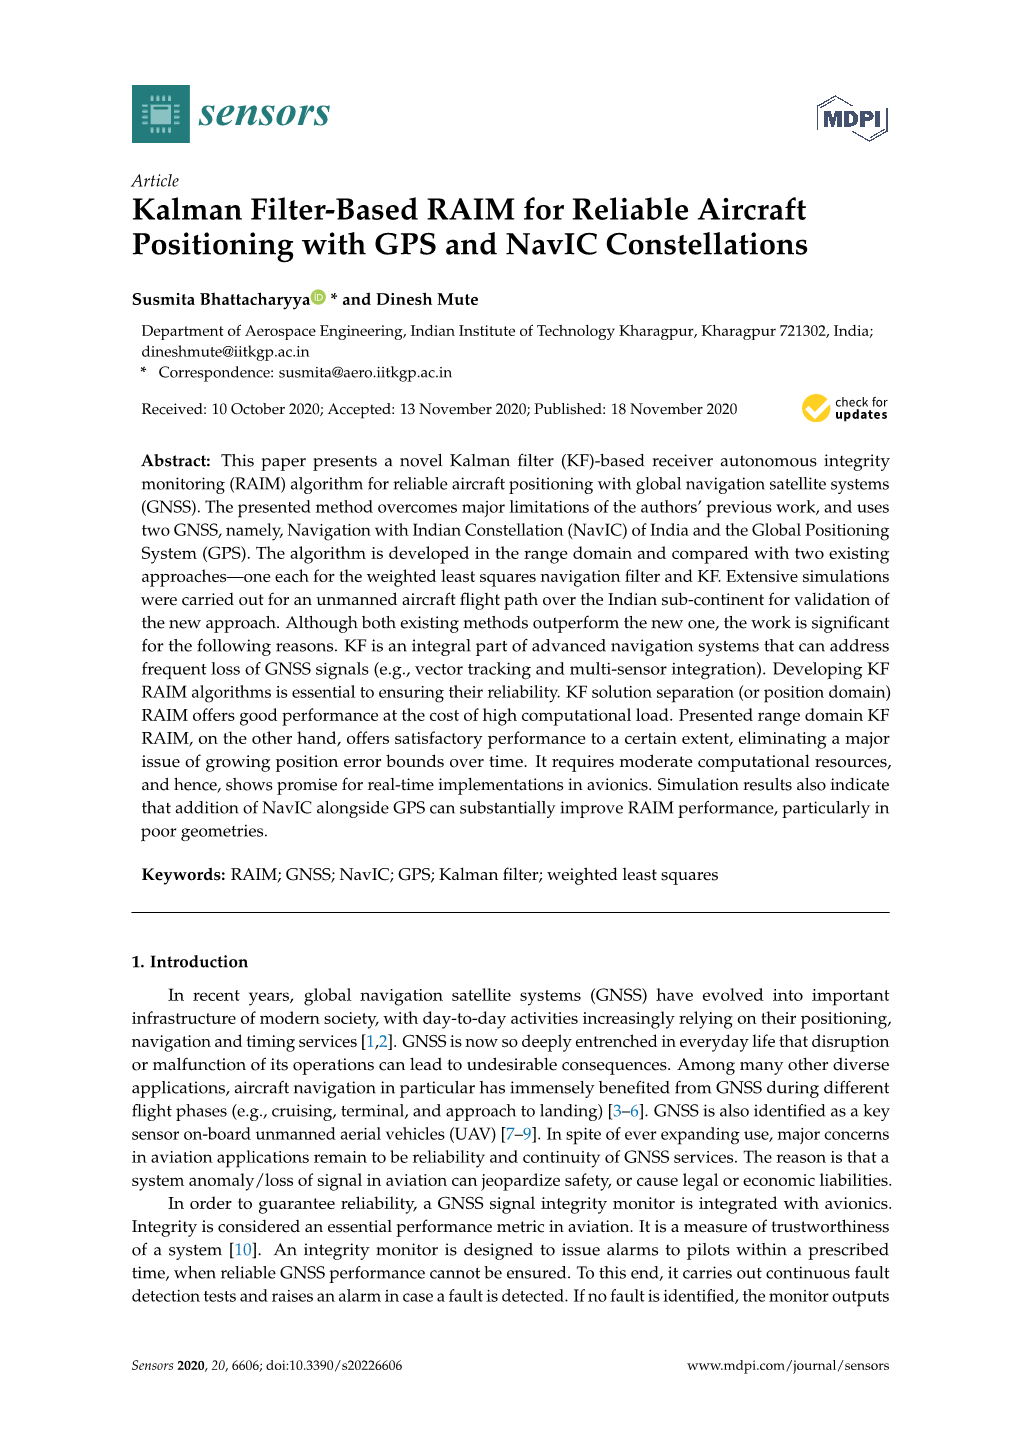 Kalman Filter-Based RAIM for Reliable Aircraft Positioning with GPS and Navic Constellations